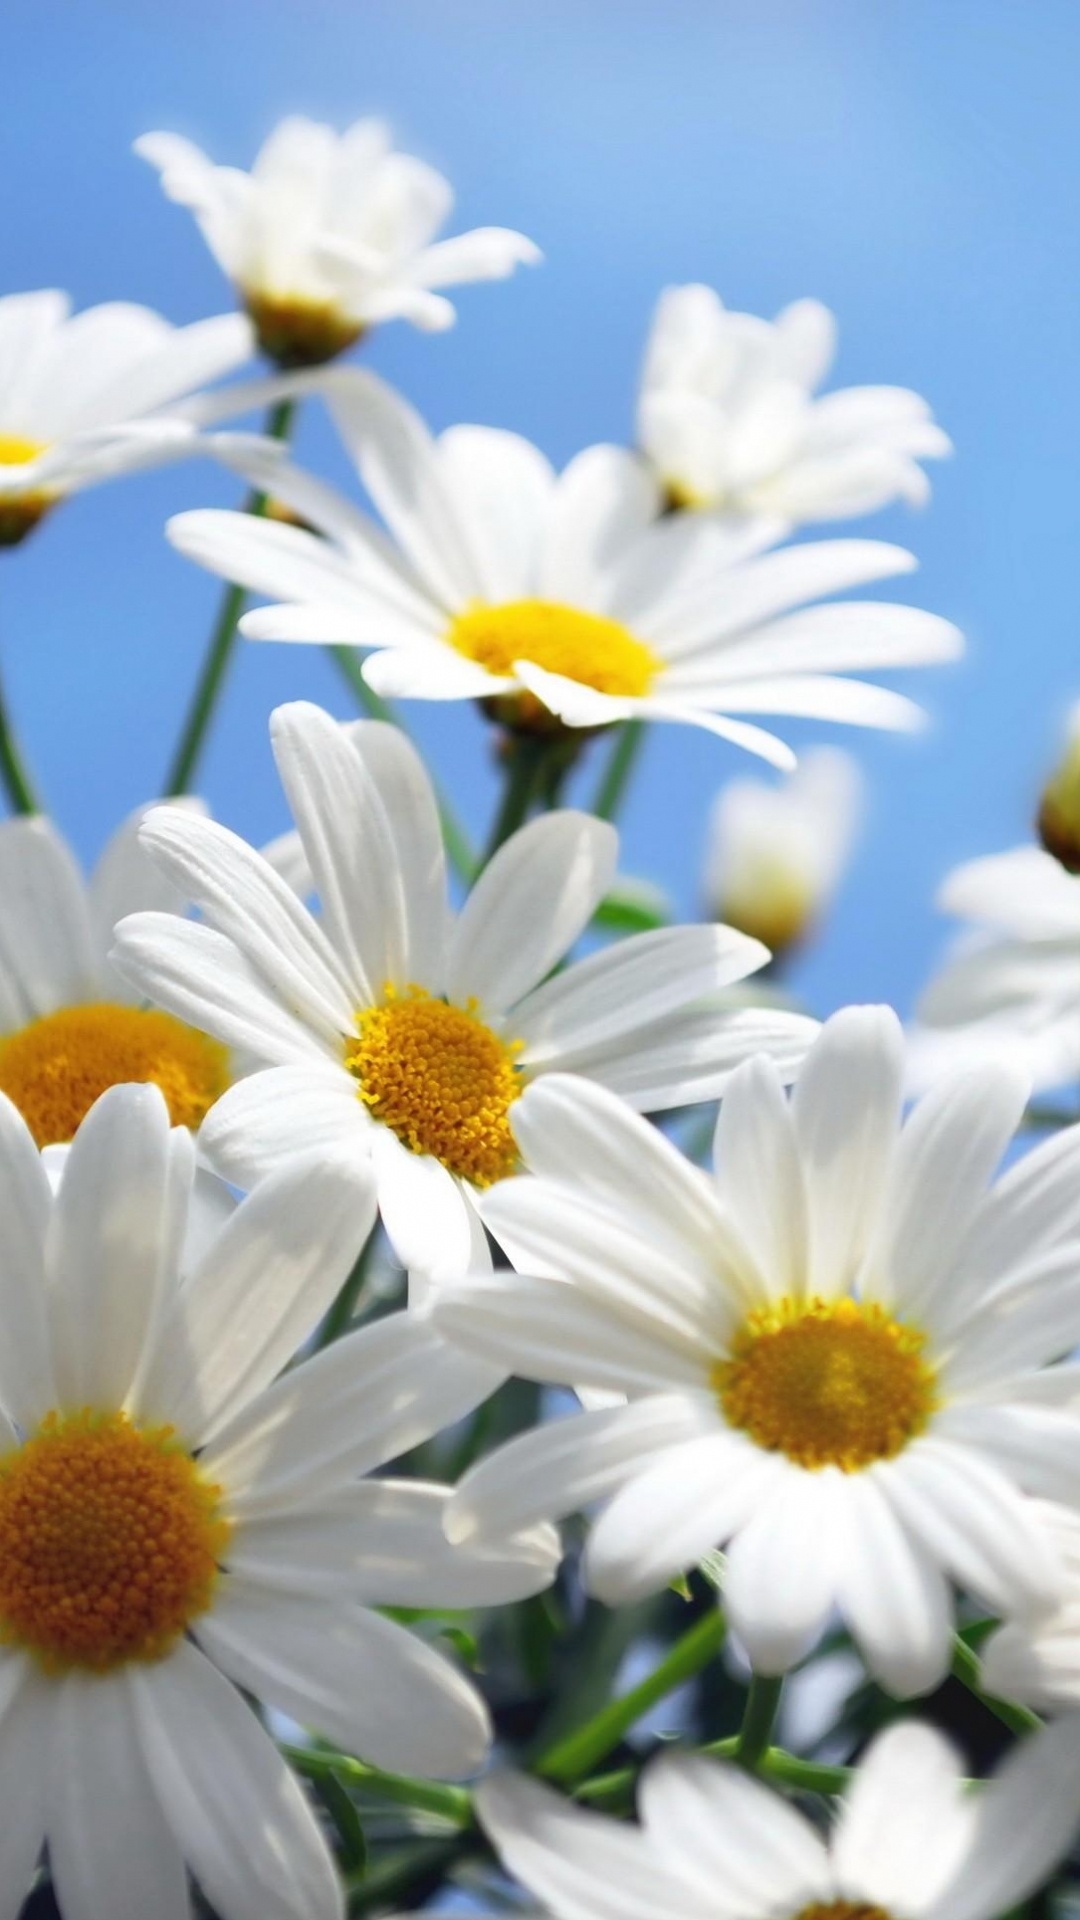 White and Yellow Daisy Flowers. Wallpaper in 1080x1920 Resolution